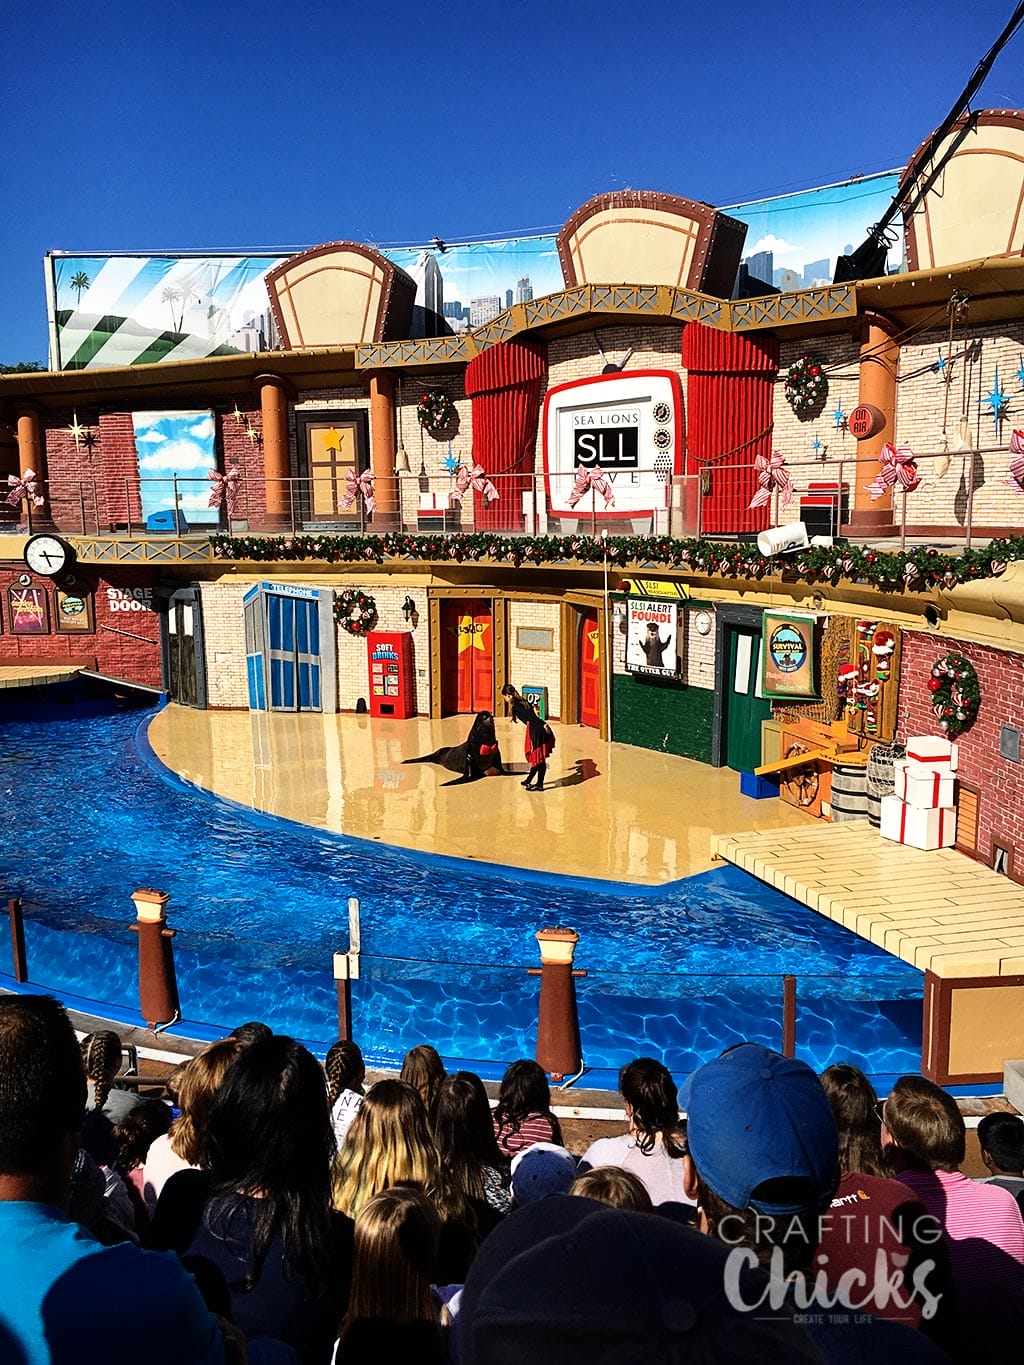 Money Saving Tips for SeaWorld - Tips for a fun family vacation in San Diego